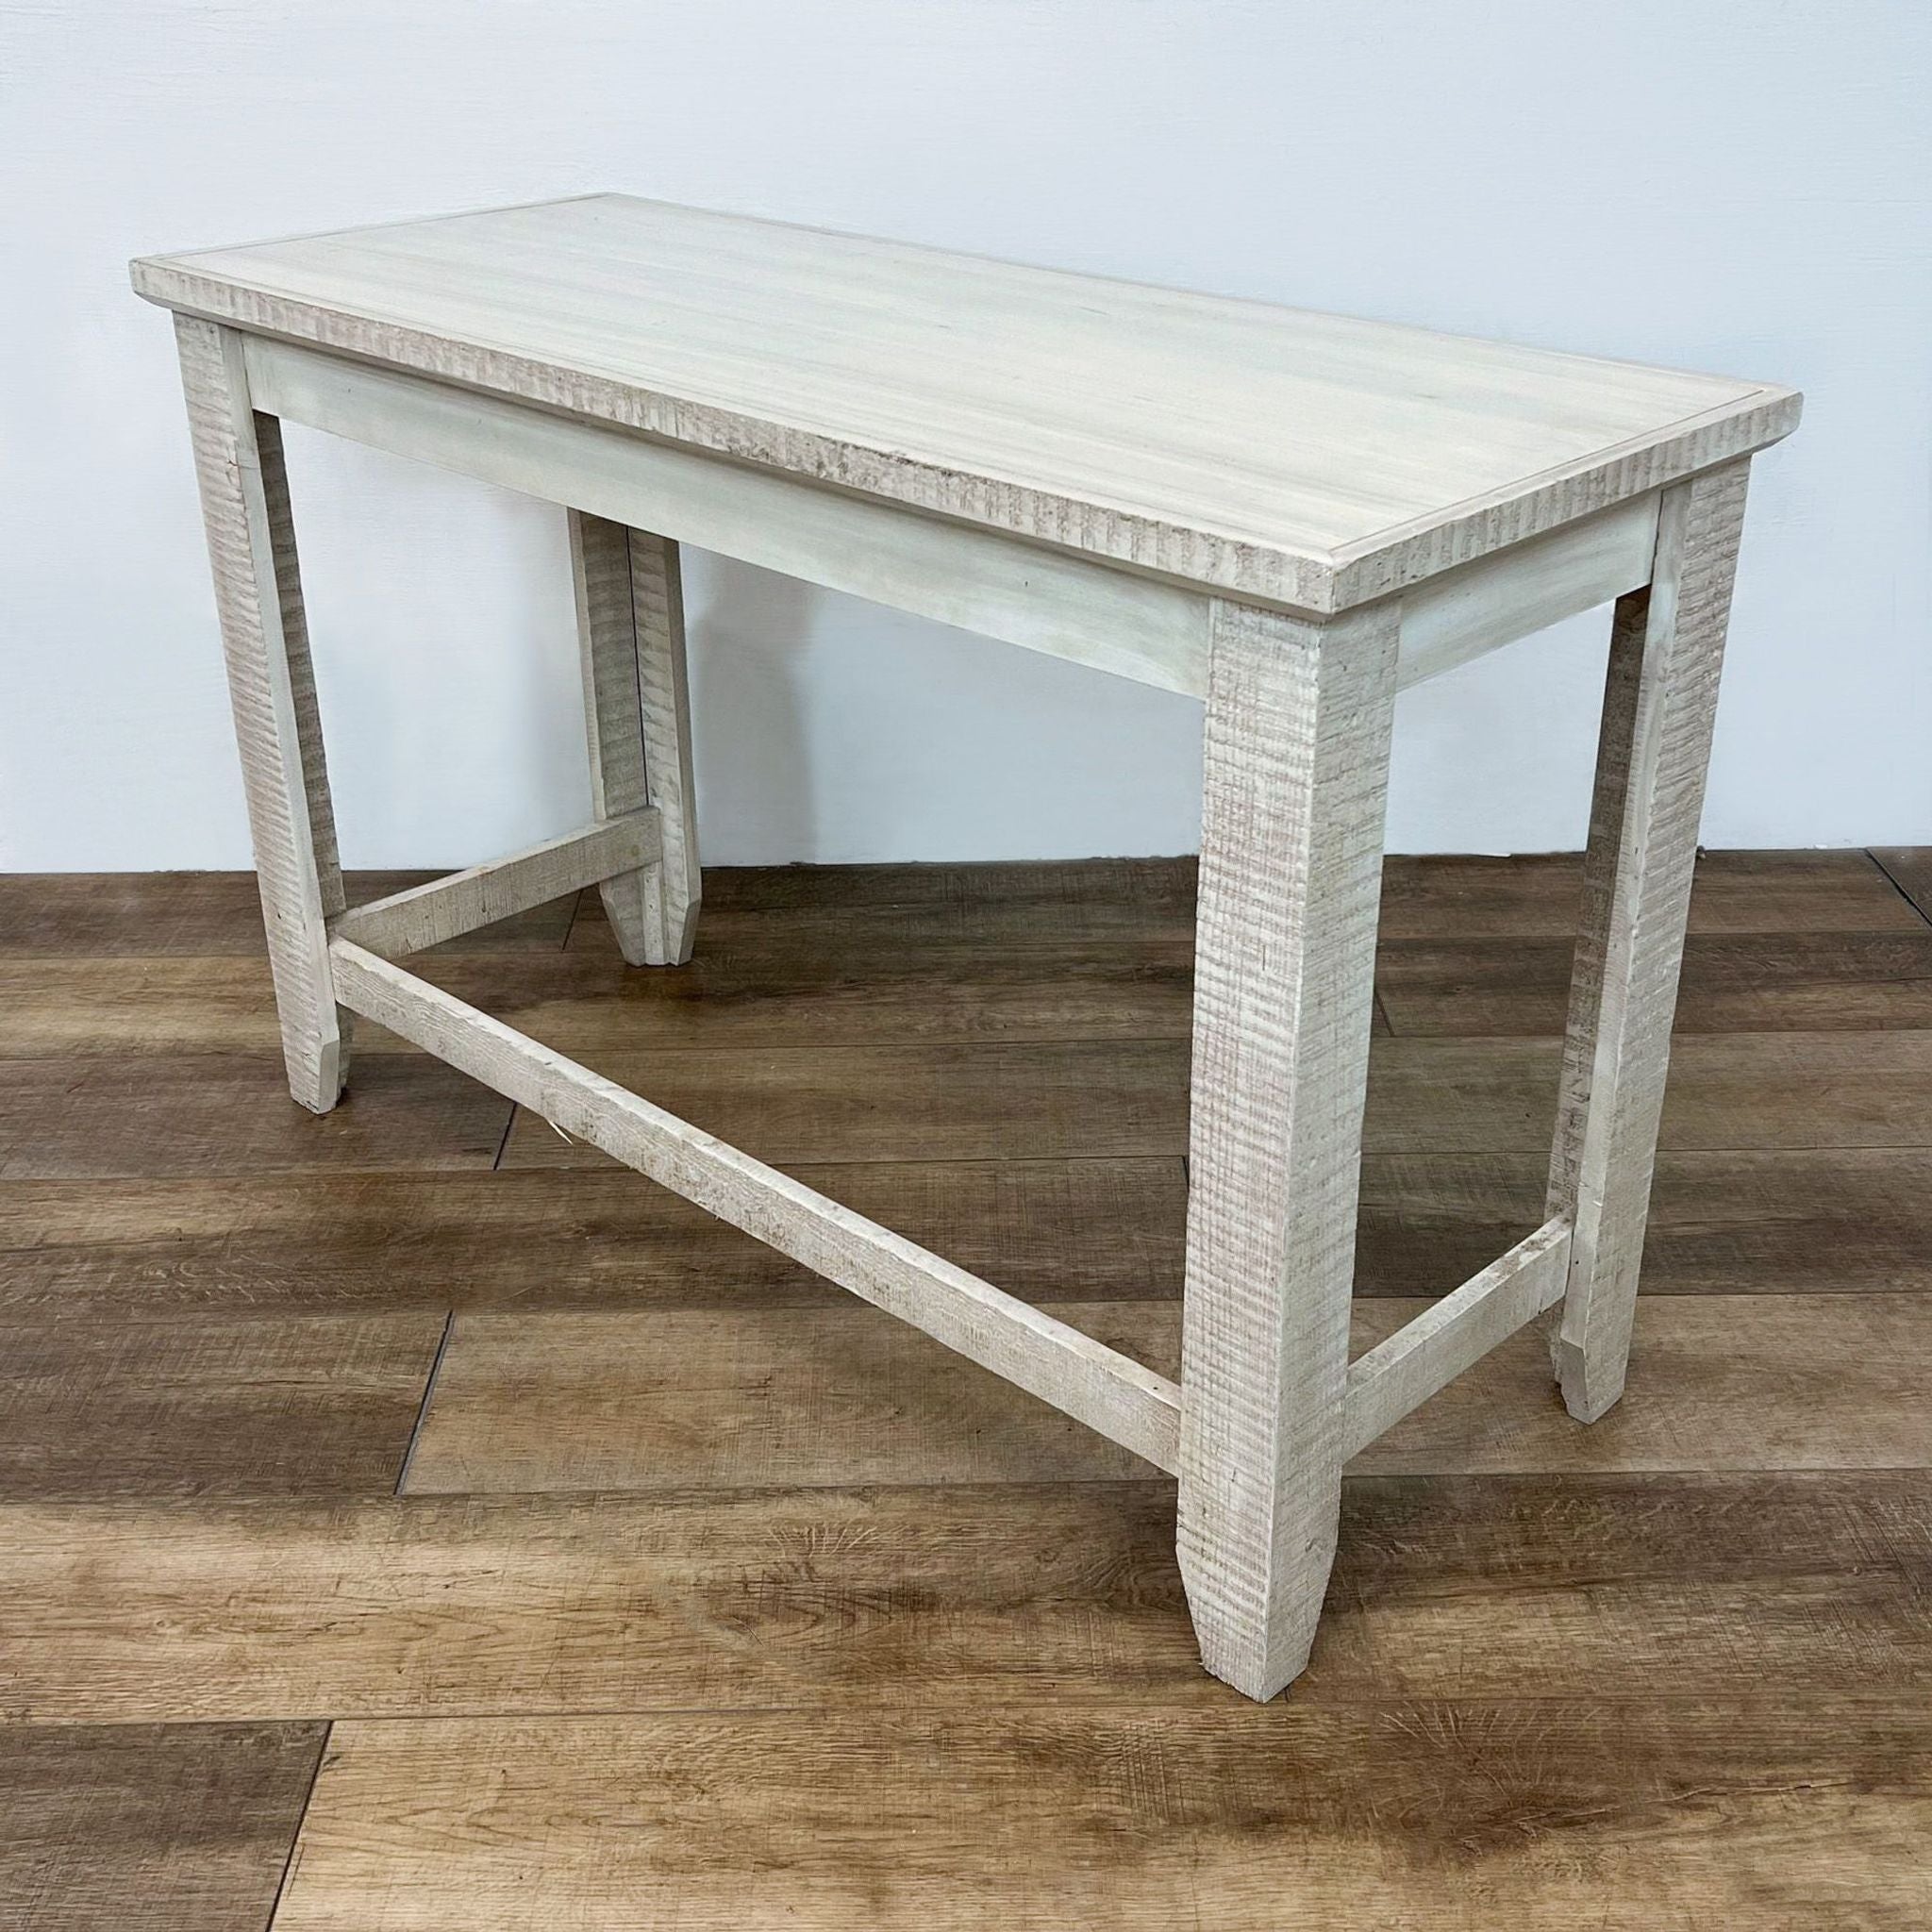 Reperch brand side table with a weathered white finish on wooden floor.